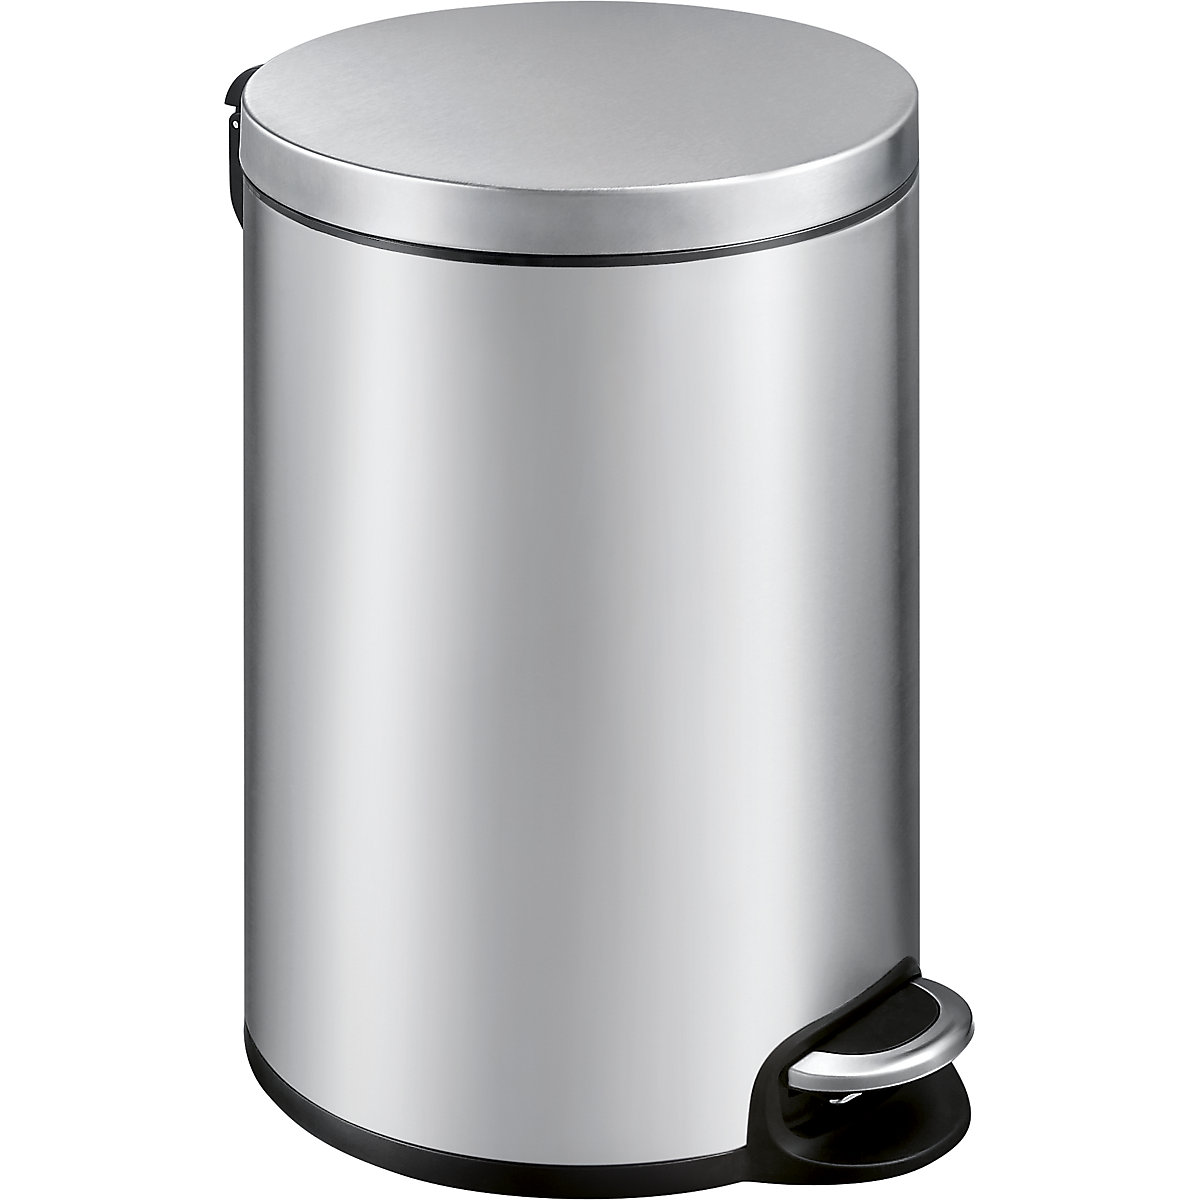 Waste collector with pedal, stainless steel